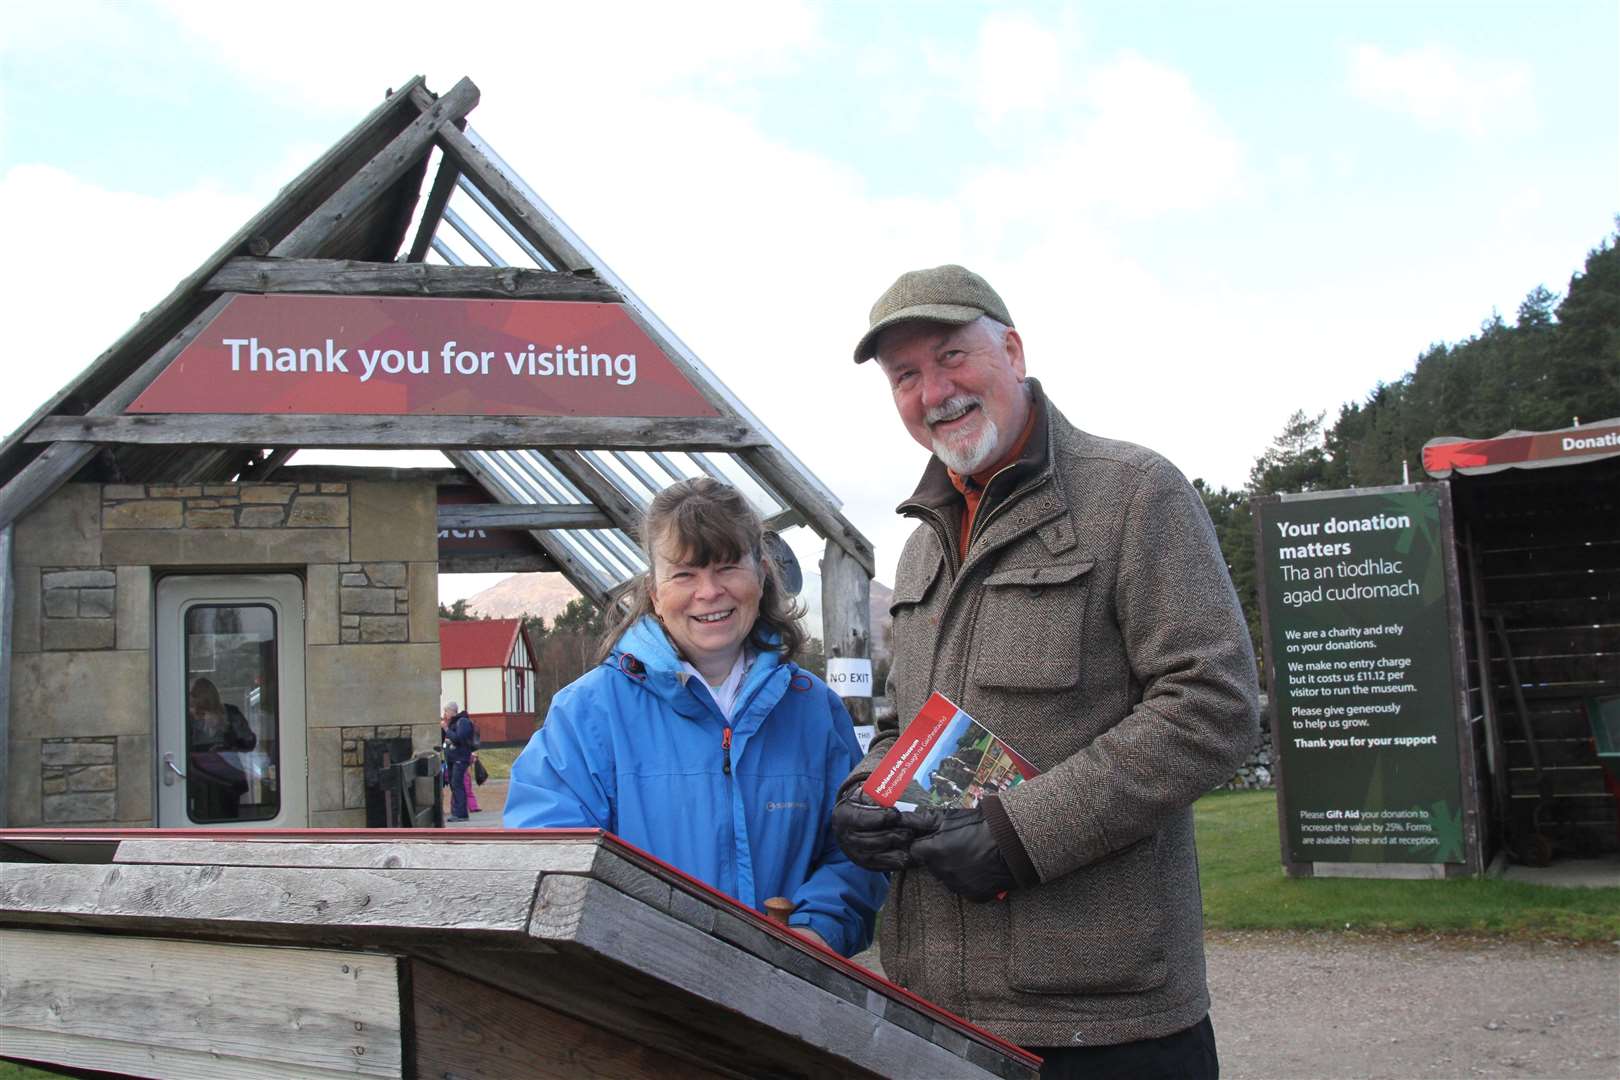 The first visitors were John and Gillian Hanson, all the way from Bury.